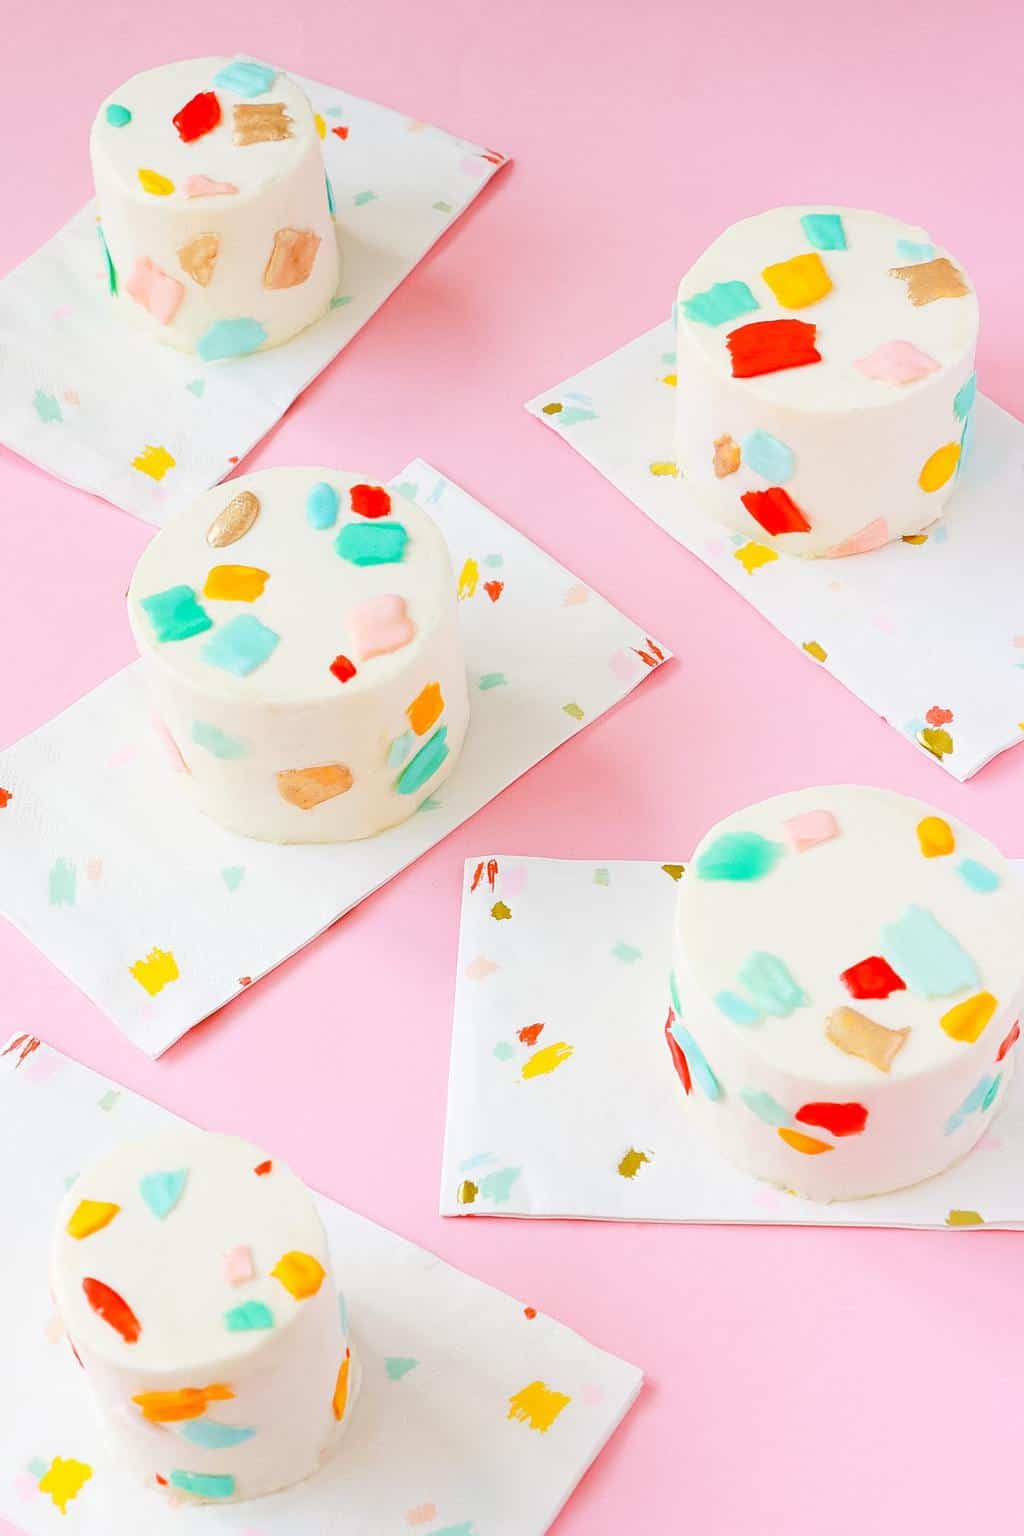 DIY Mini Confetti Print Cakes by top Houston lifestyle blogger Ashley Rose of Sugar and Cloth #recipe #diy #cake #entertaining #parties